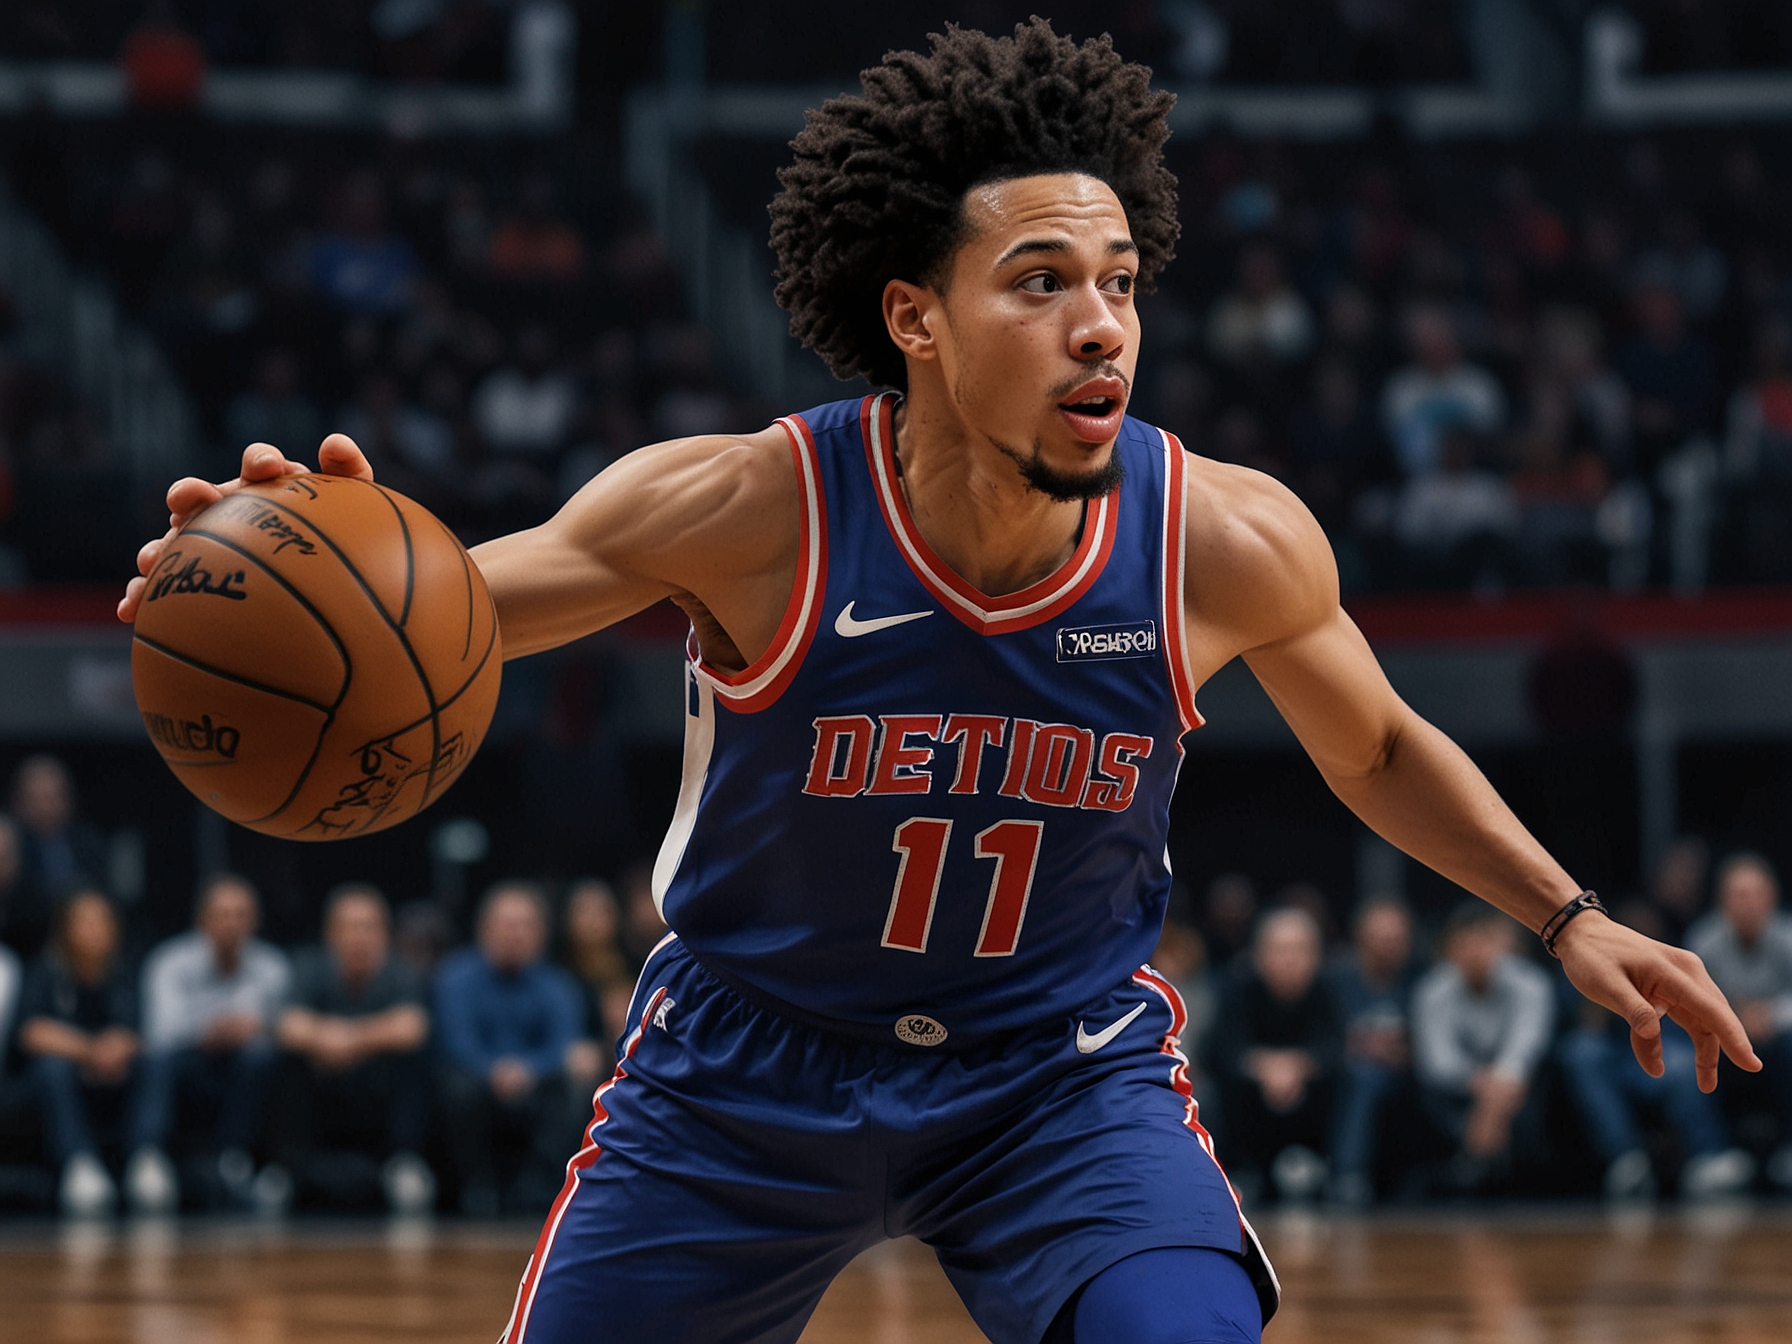 A dynamic depiction of Cade Cunningham in action during a game, highlighting his importance to the Detroit Pistons' future strategy and potential roster changes.